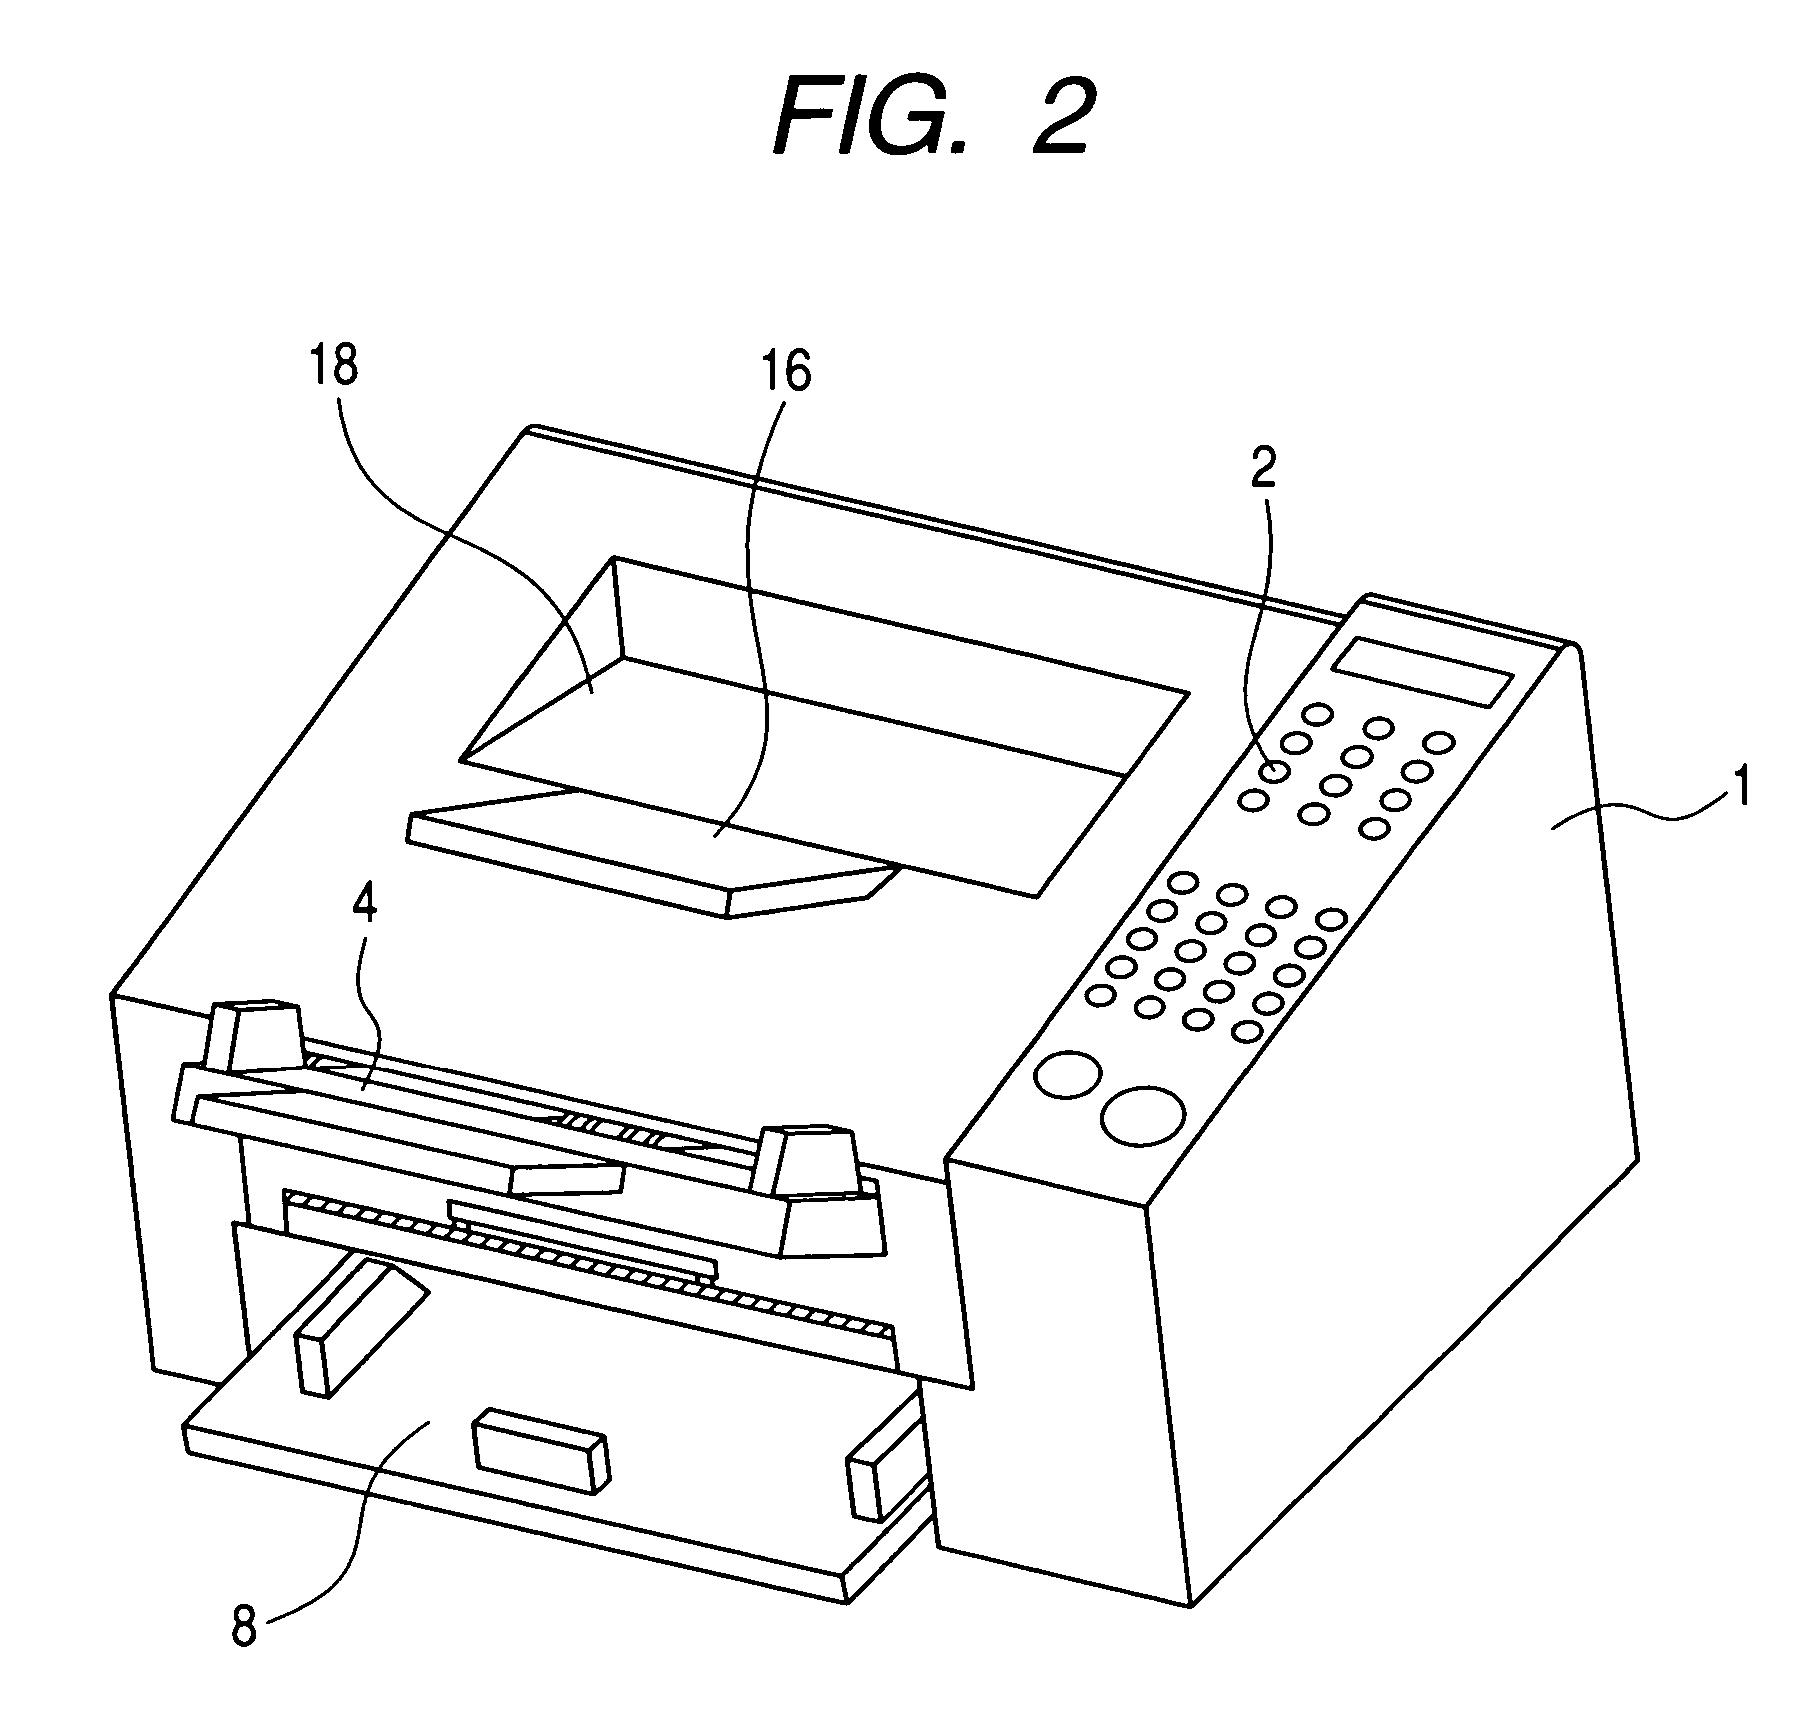 Image reading and recording apparatus having a cartridge dismounting space between a fixing unit and an exposing unit